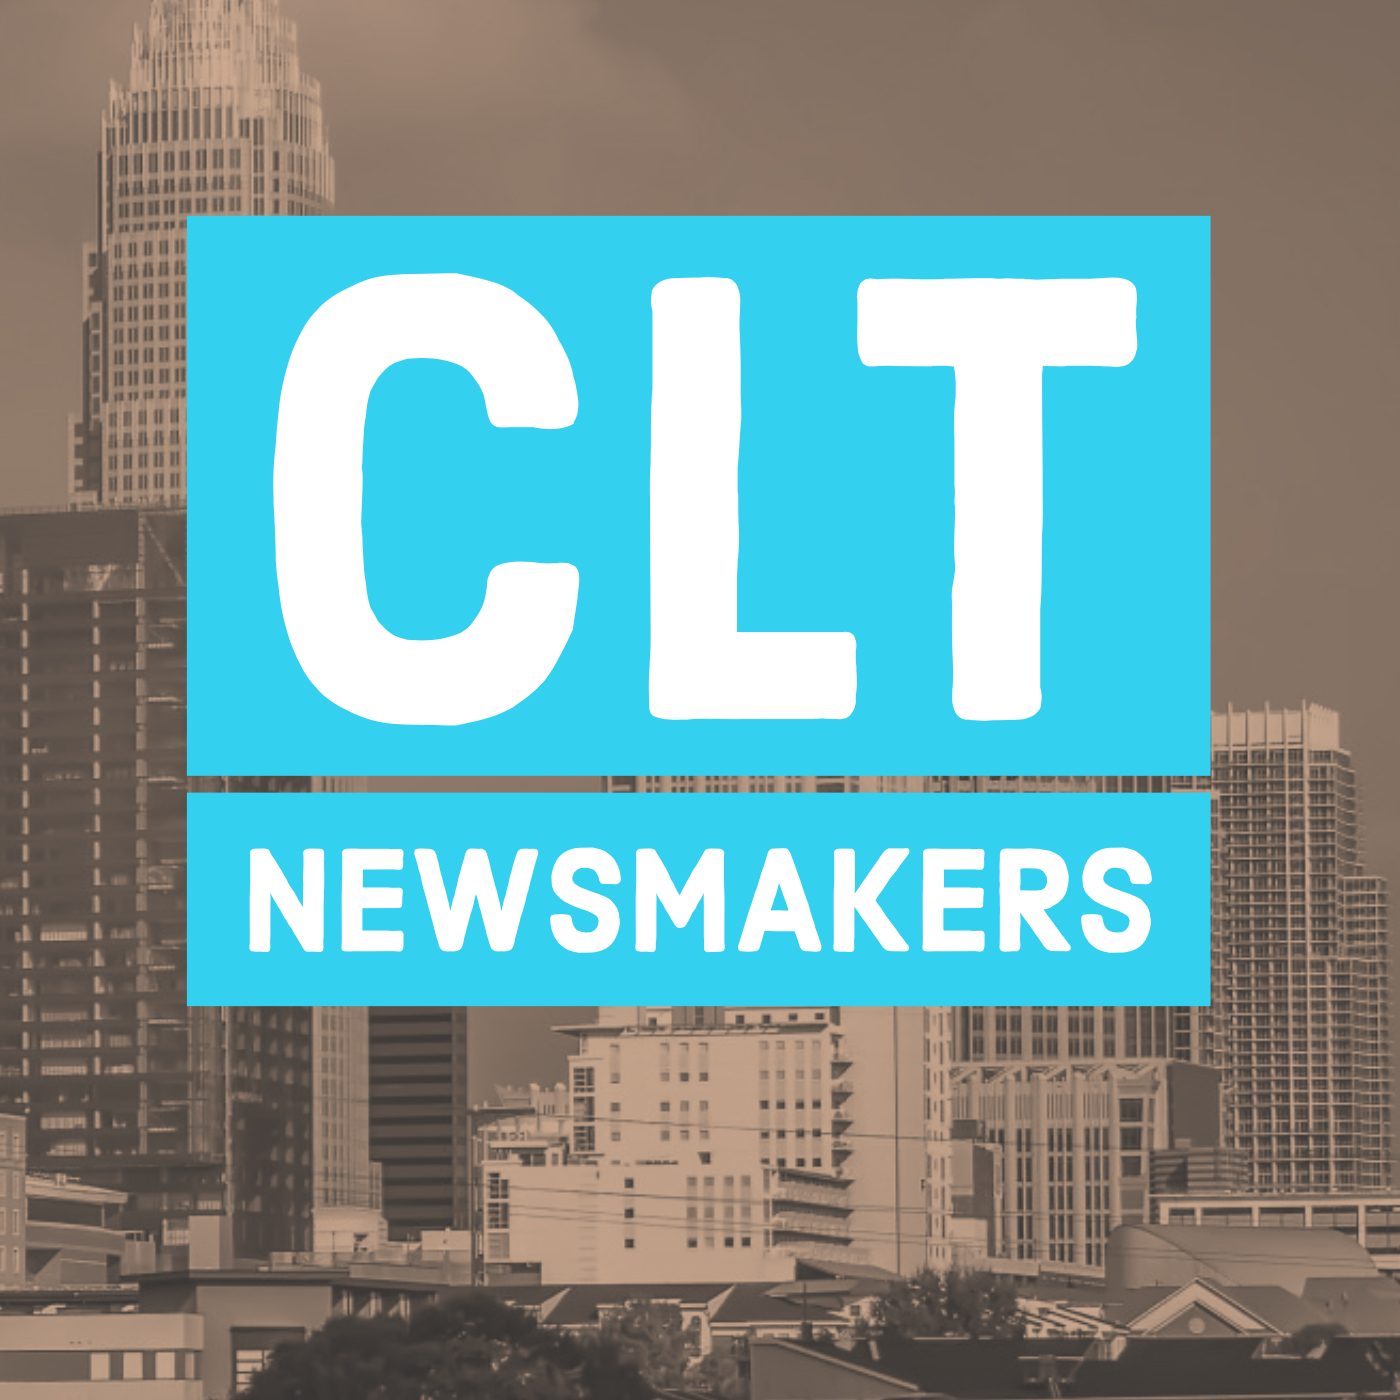 Charlotte Newsmakers